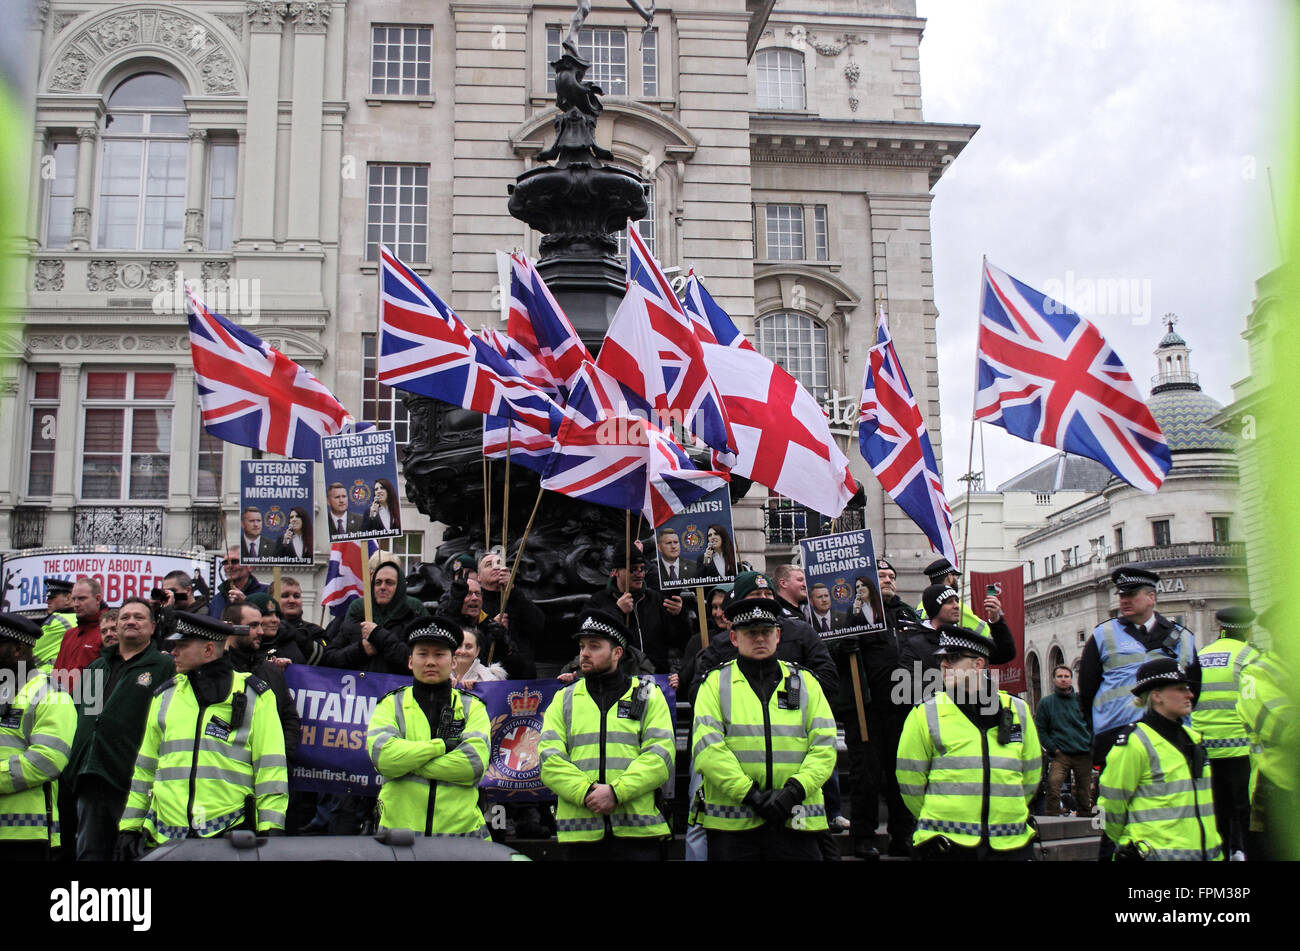 London, UK. Saturday 19th March 2016. The Britain first demonstrators are kept apart from antifascist demonstrators by a police dordon. Stock Photo